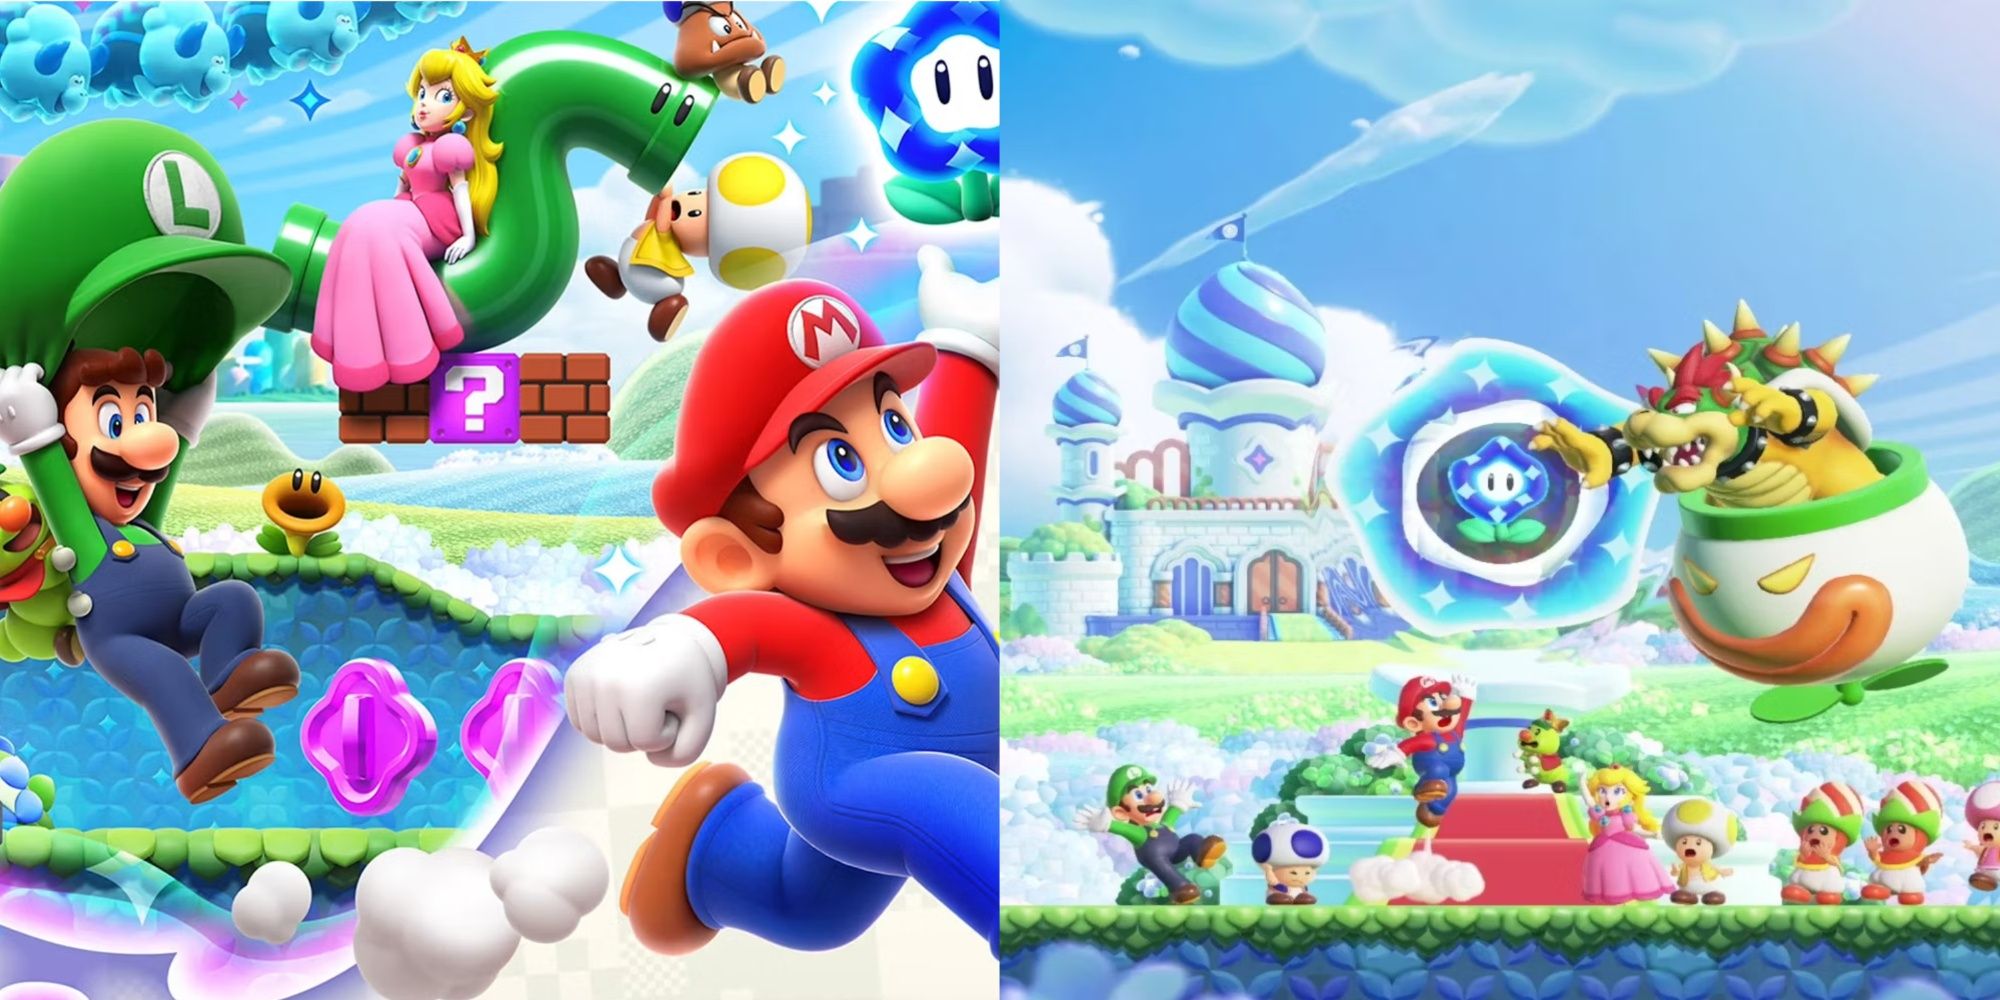 mario and friends in mario wonder on both the cover art and in game with bowser and a wonder flower